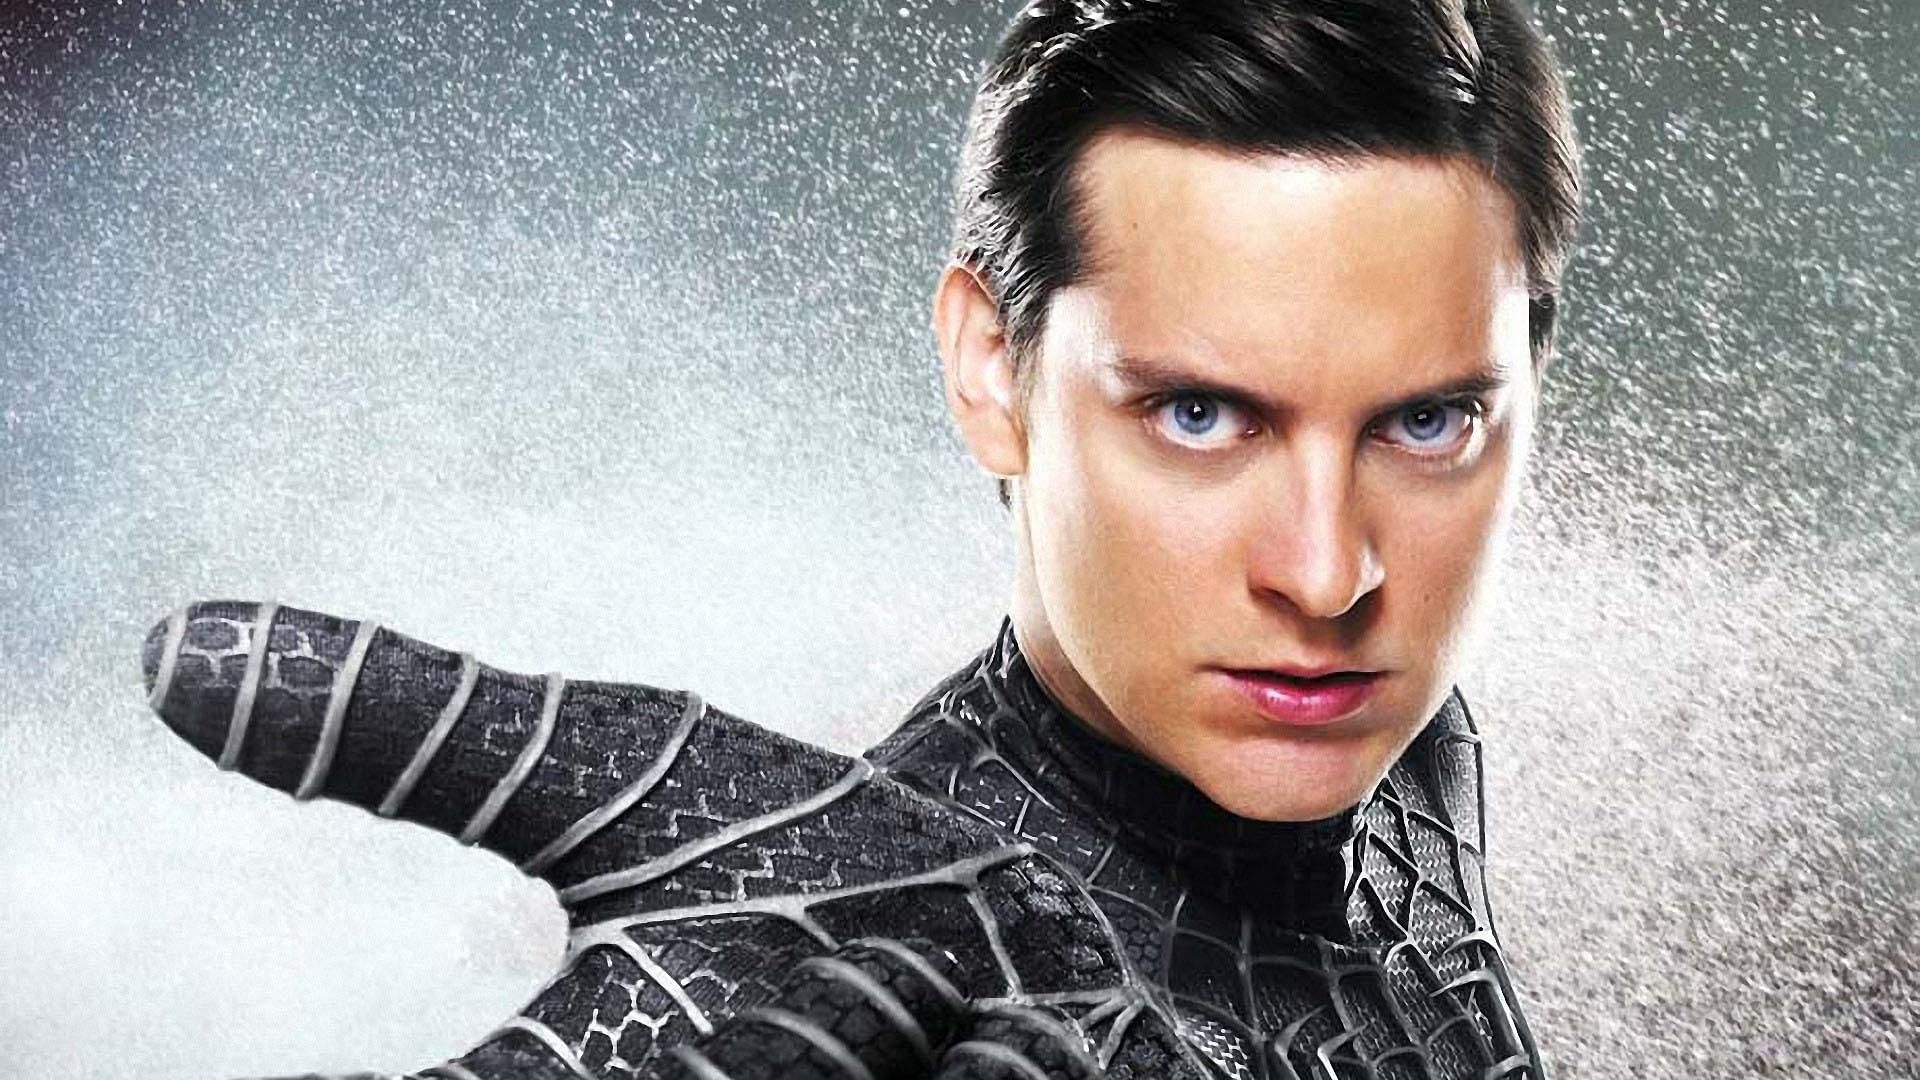 Tobey Maguire&#039;s Peter Parker in the Black Suit in a poster for Spider-Man 3 (image via Sony Pictures)